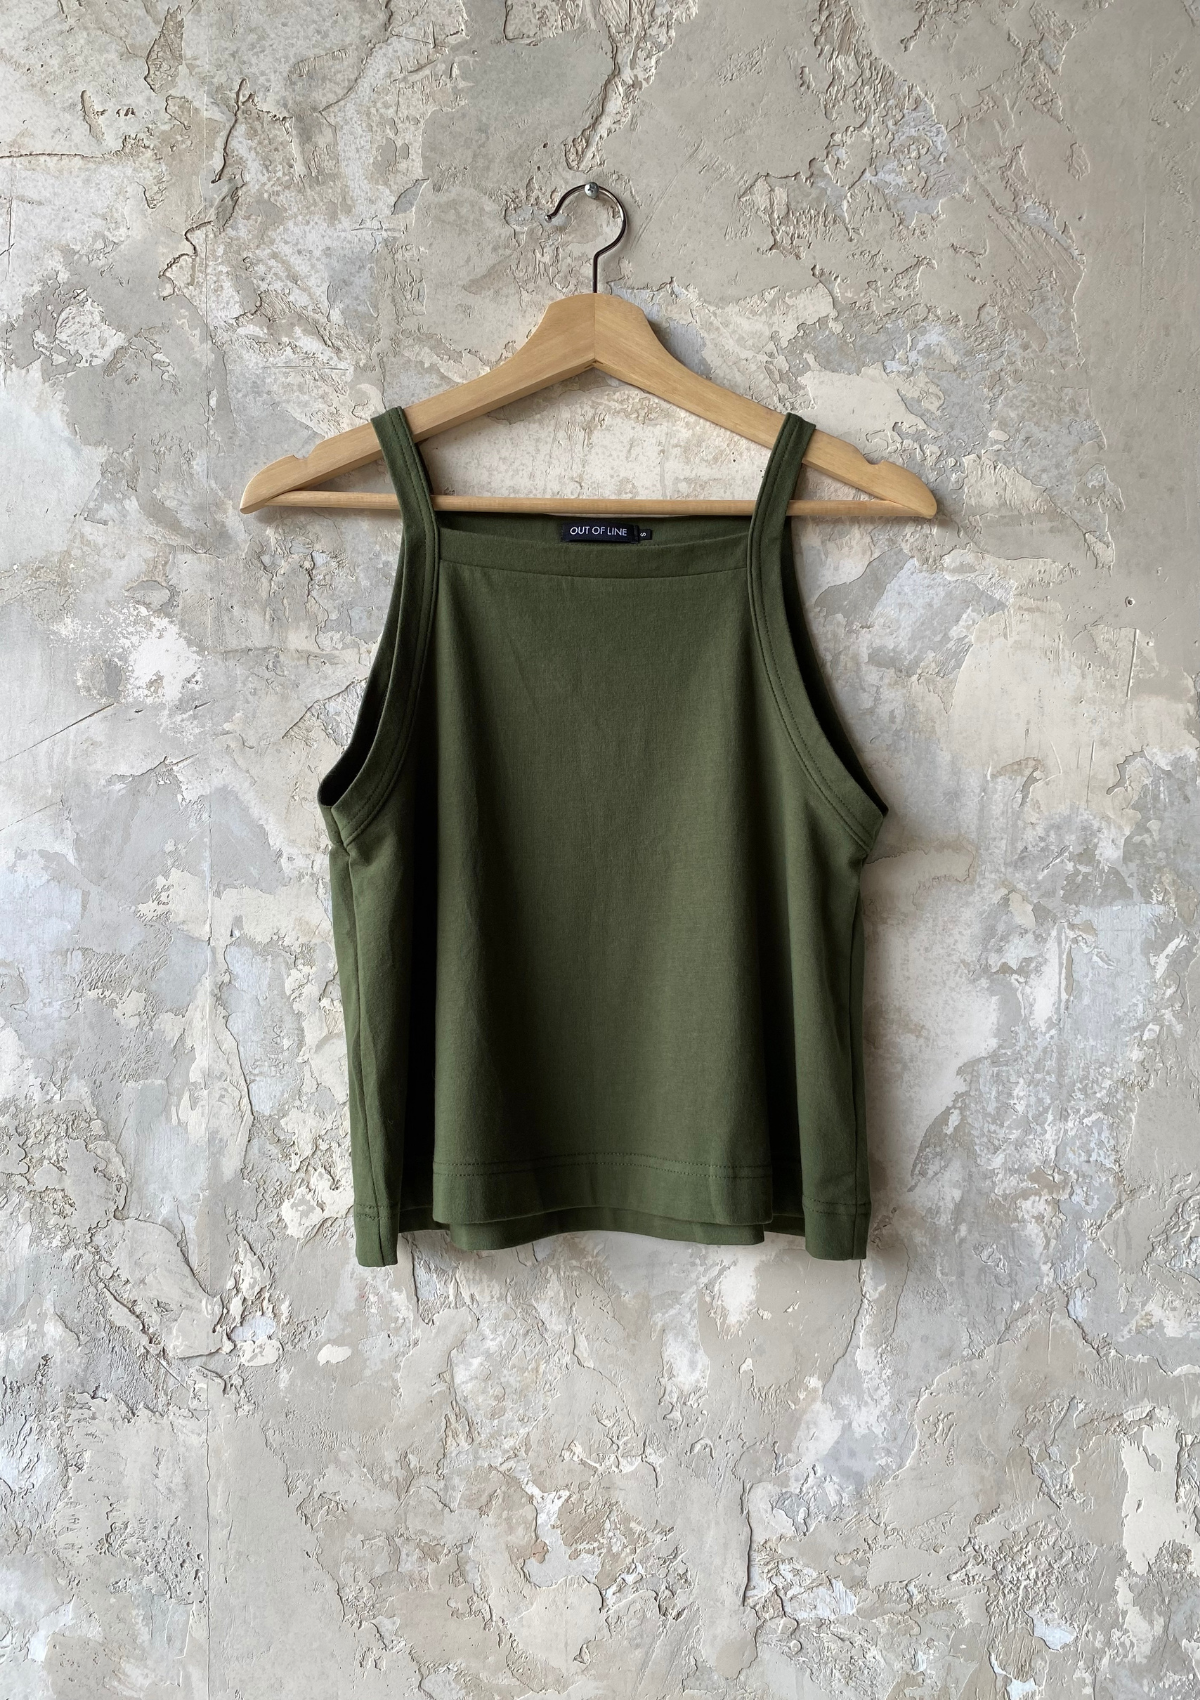 Small, Frame Tank in olive